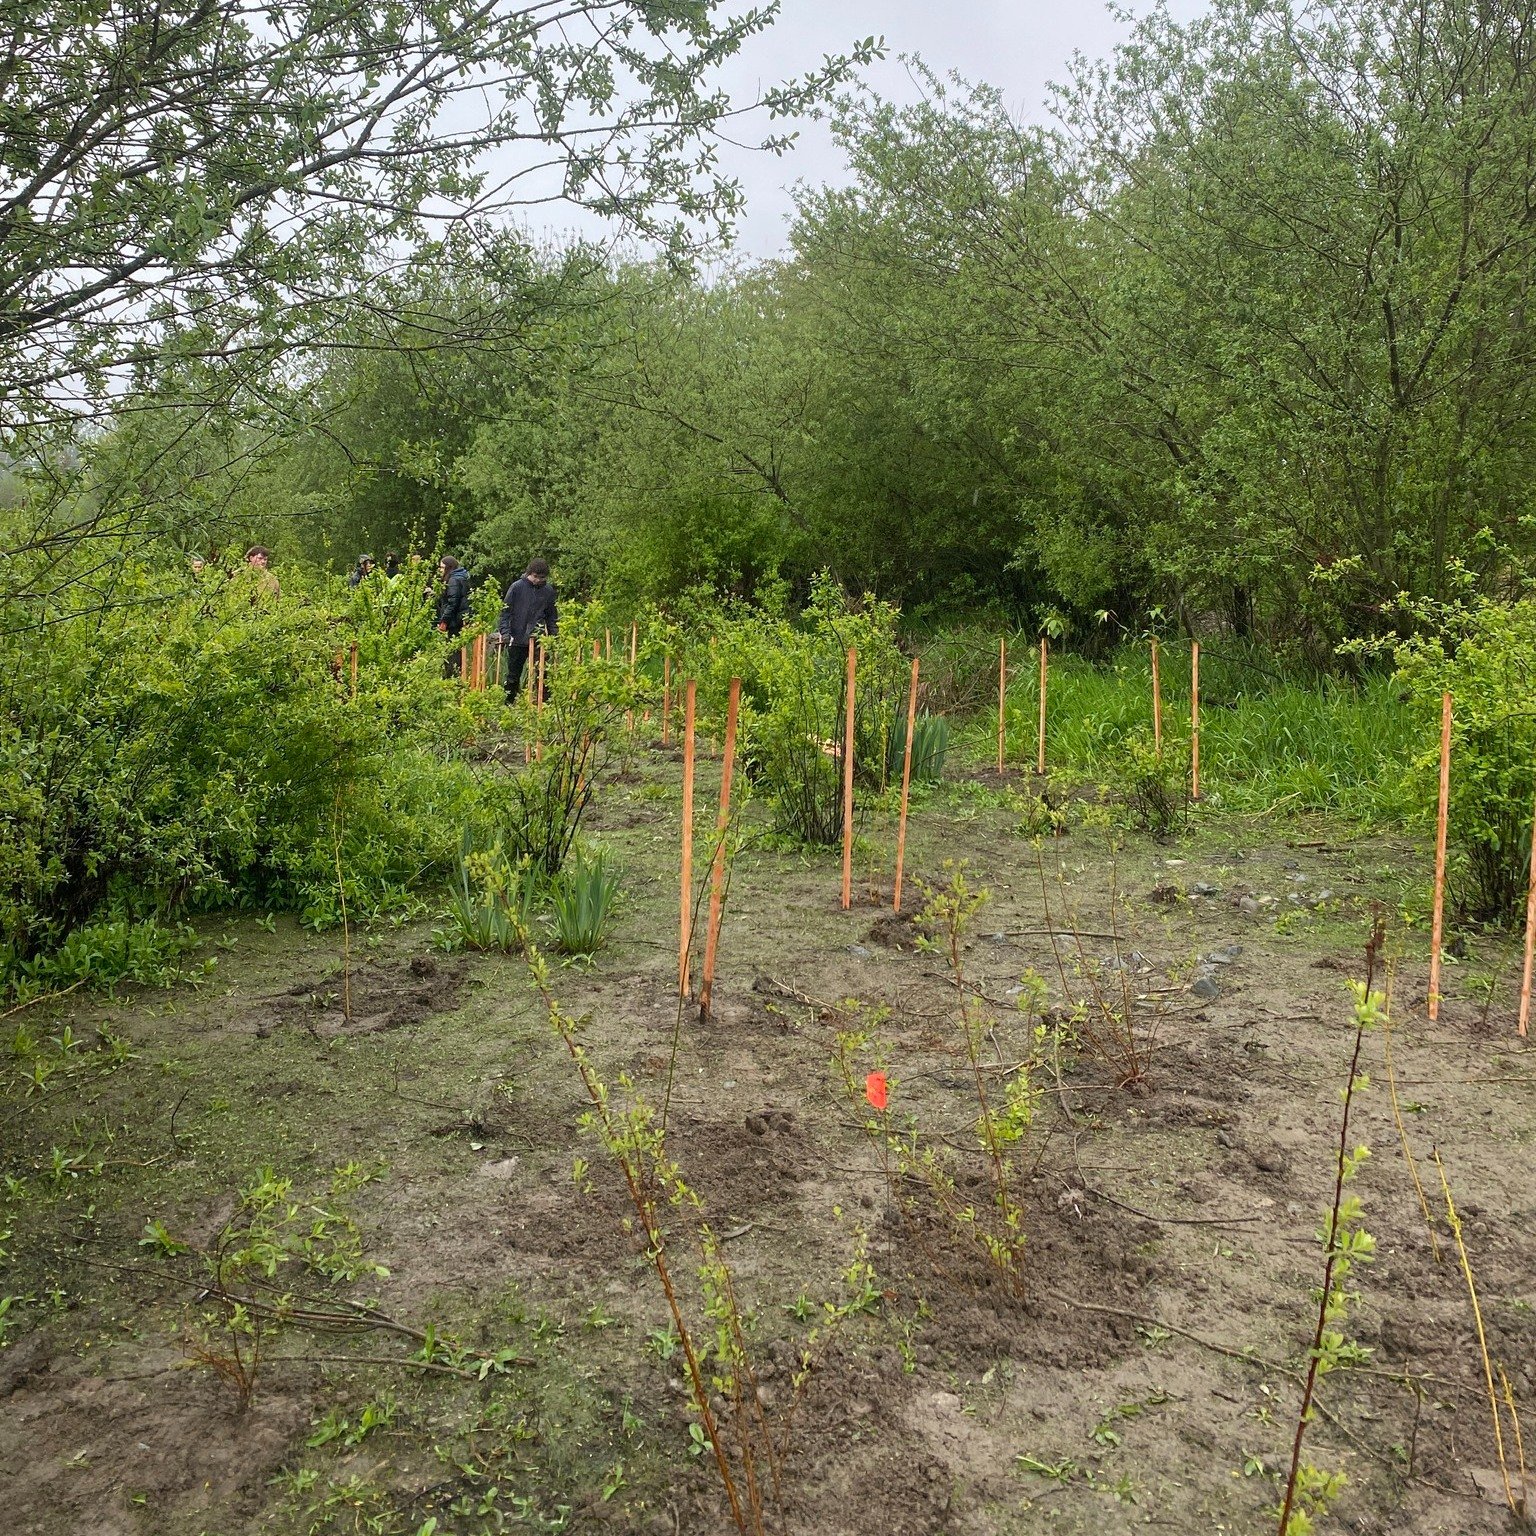 Reflecting on highlights from last week: We have started our riparian planting project along Somenos Creek to improve riparian function, begun removing invasives at the Somenos Garry Oak Protected Area, and launched our fishing program in Averill and